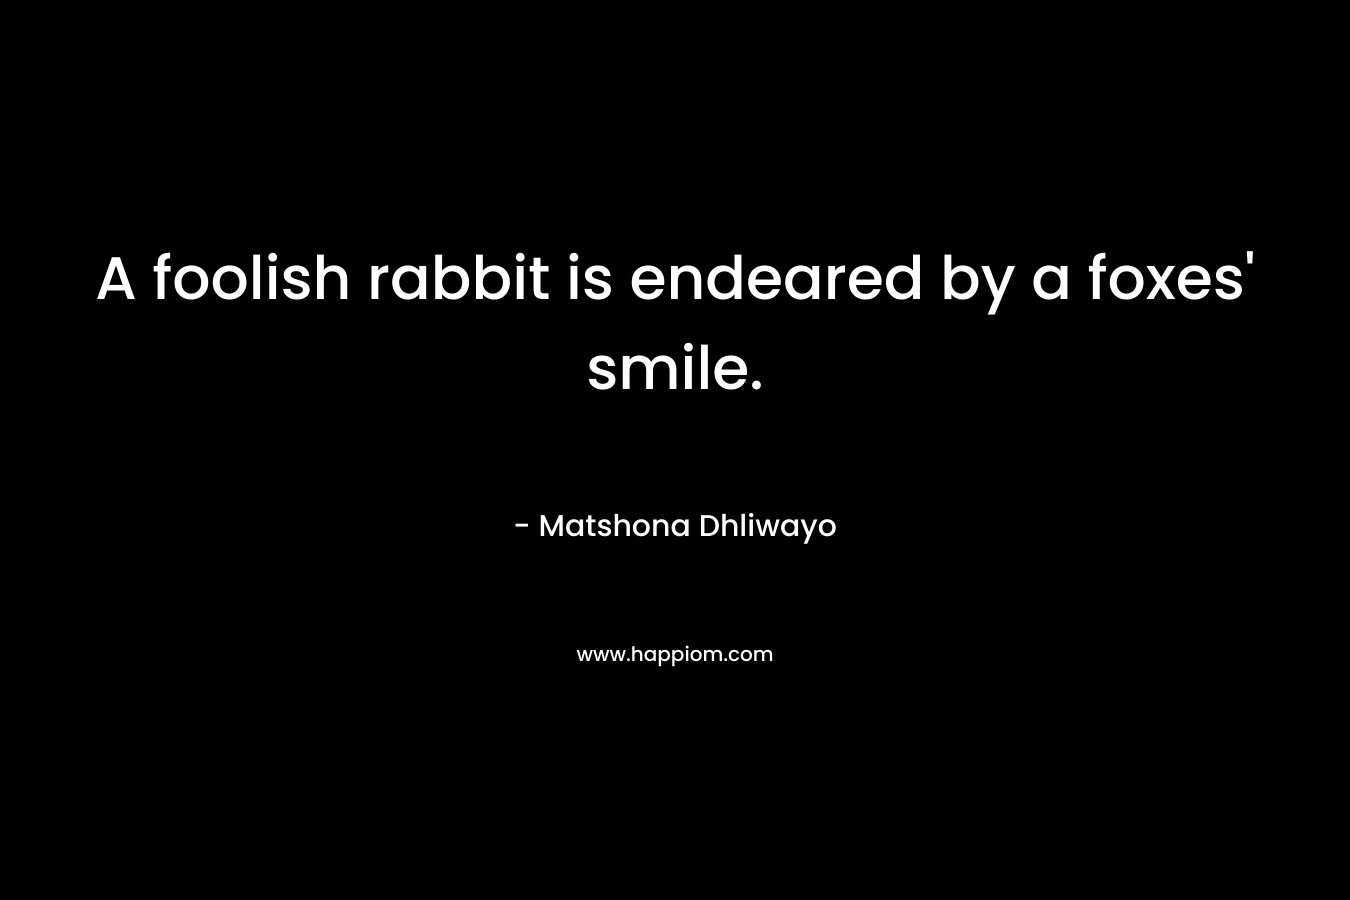 A foolish rabbit is endeared by a foxes’ smile. – Matshona Dhliwayo